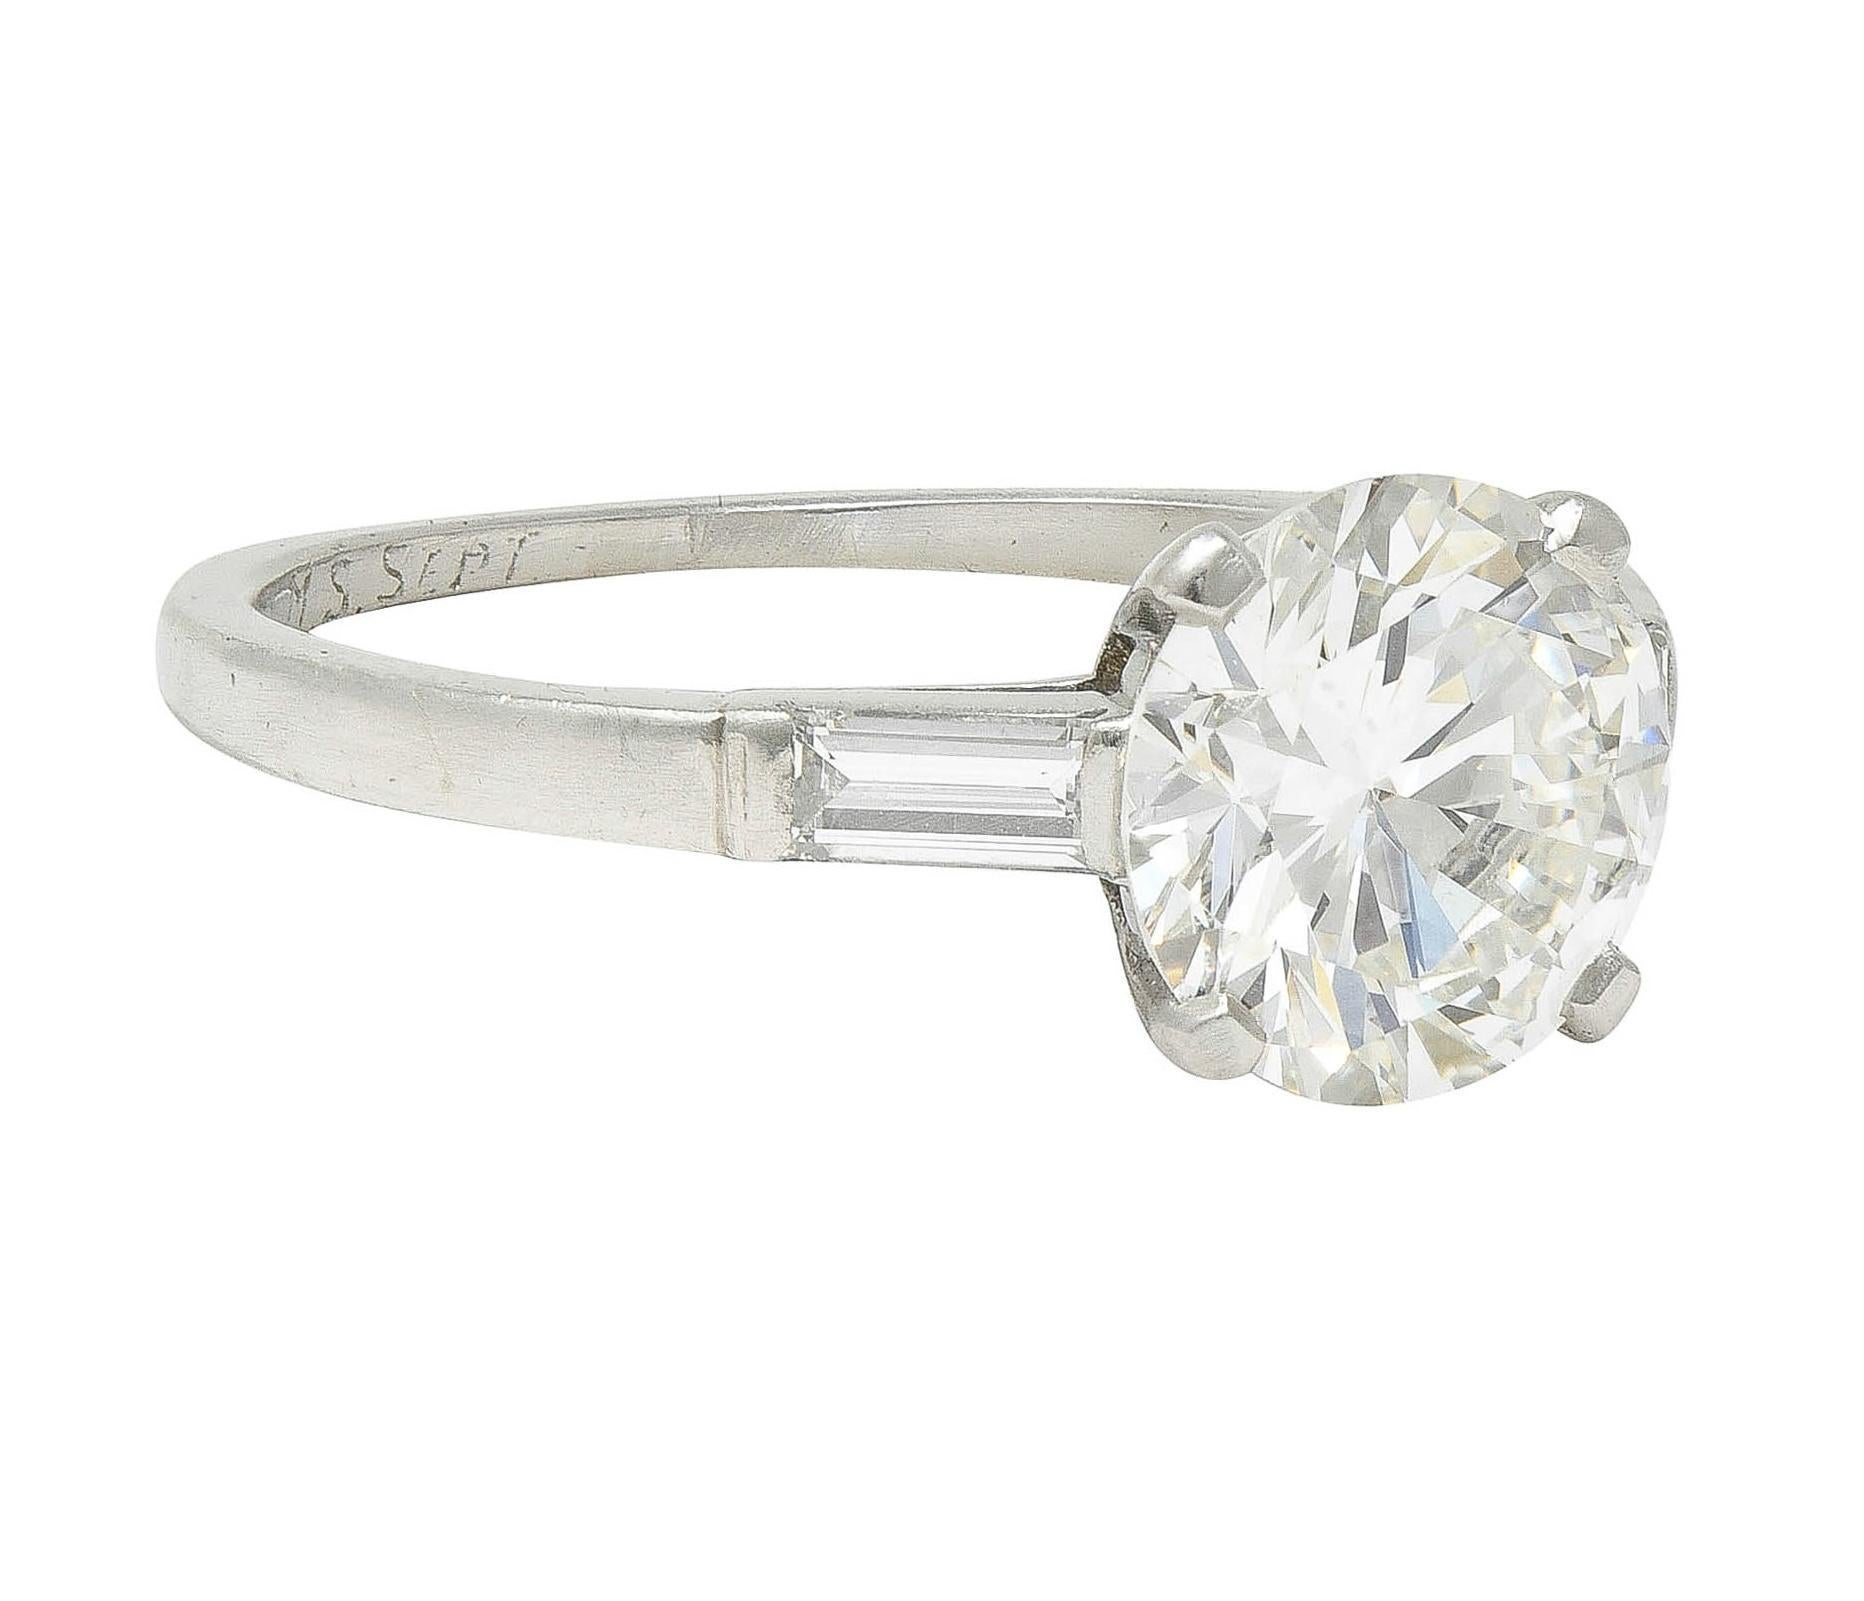 Centering a round brilliant cut diamond weighing 1.82 carats - H color with VVS2 clarity
Prong set in basket - flanked by baguette cut diamonds bar set in cathedral shoulders
Weighing approximately 0.18 carat total - eye clean and bright
Shank is